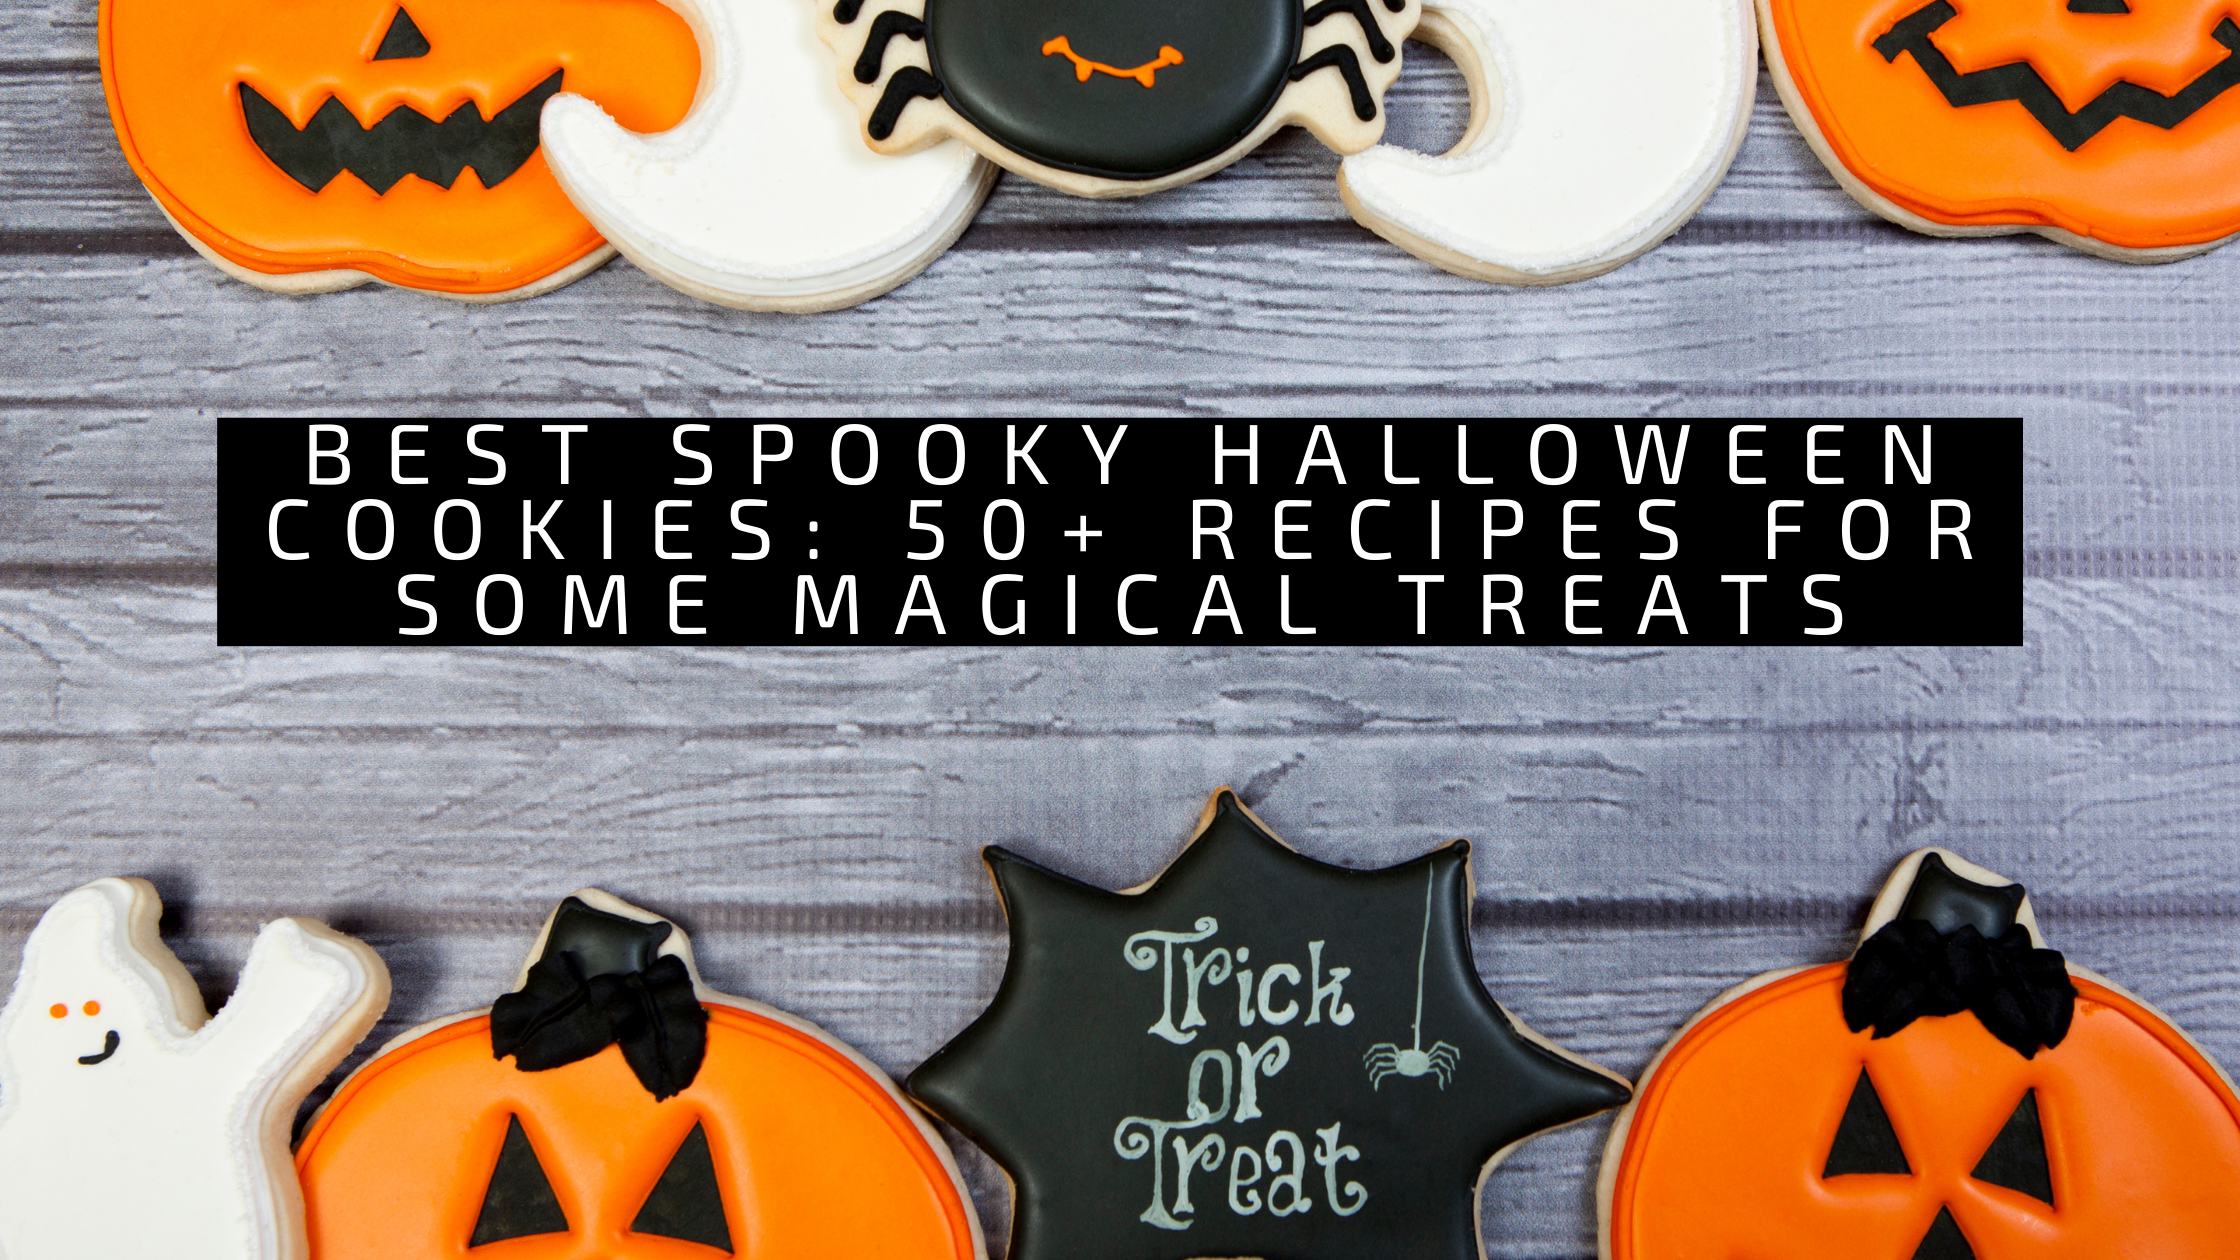 Best Spooky Halloween Cookies: 50+ Recipes for Some Magical Treats 20